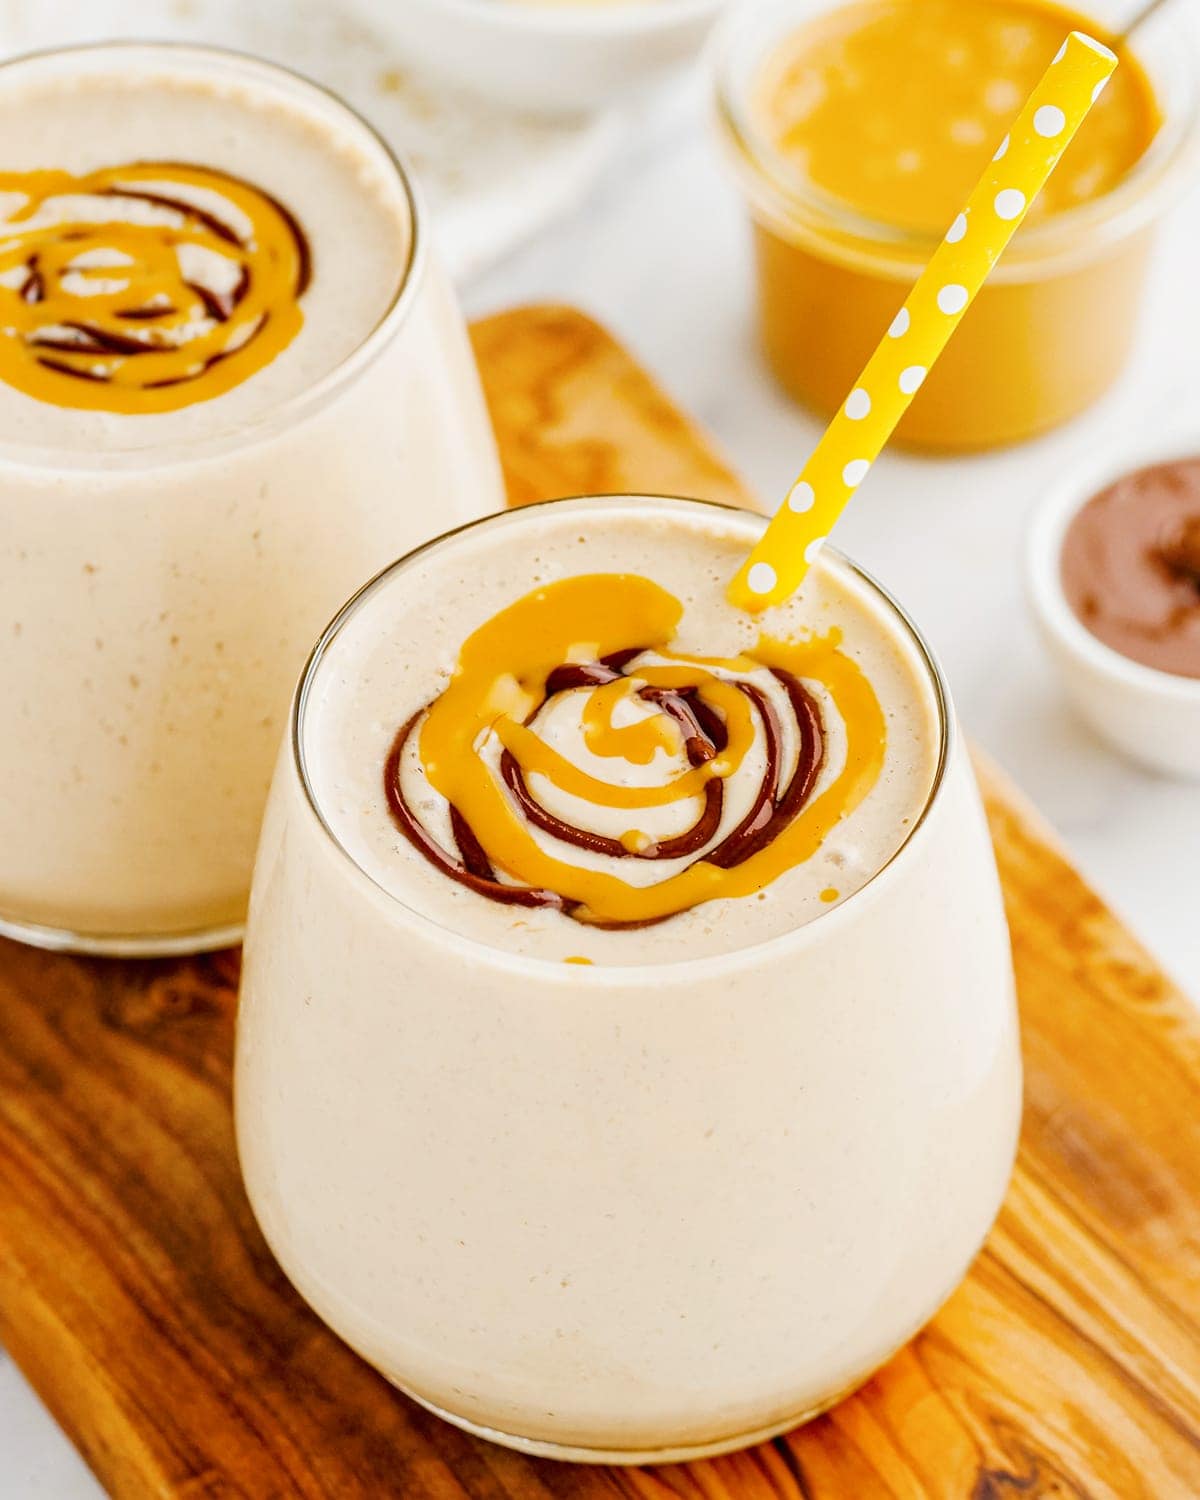 A glass of peanut butter banana smoothie on a wooden cutting board. The smoothie is topped with a swirl of peanut butter and chocolate syrup.